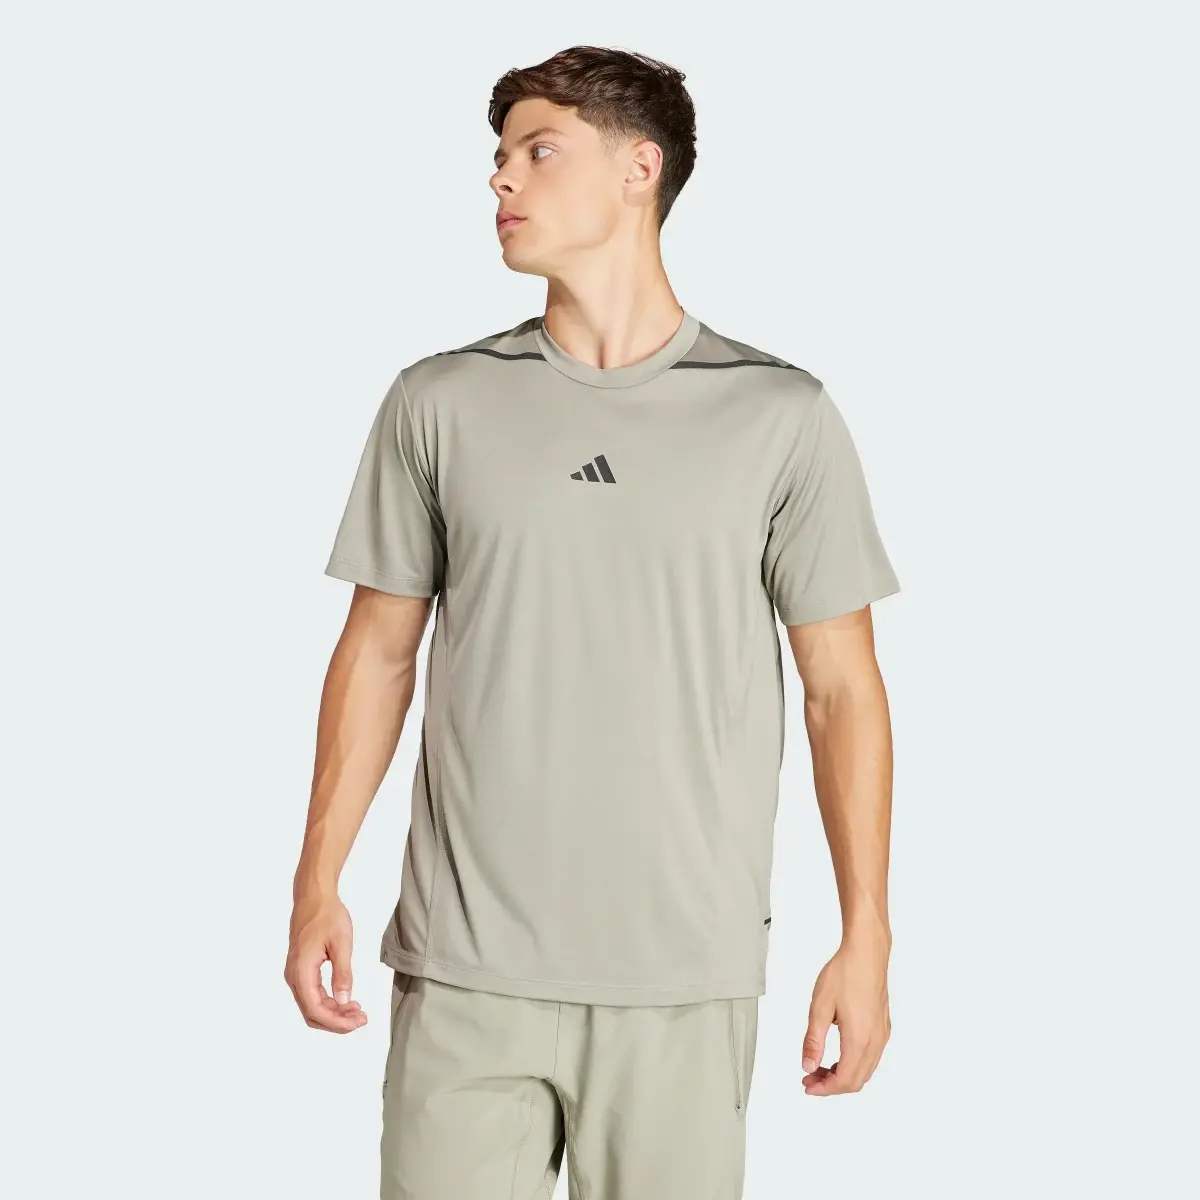 Adidas T-shirt Designed for Training adistrong Workout. 2